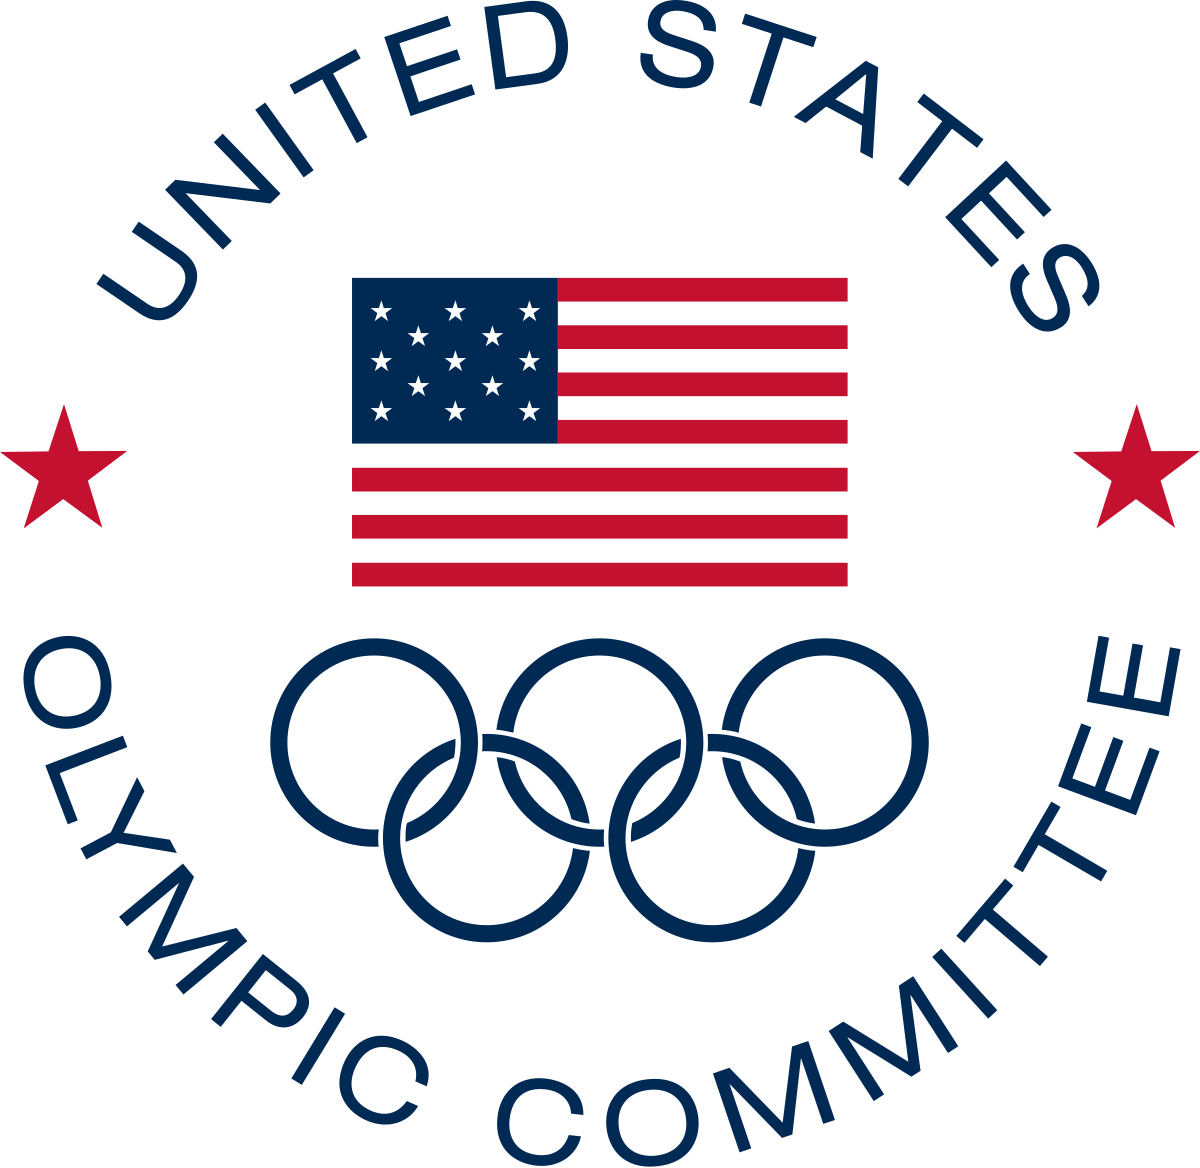 United States Olympic Committee | Meeting Street Insights | Meetingst.com